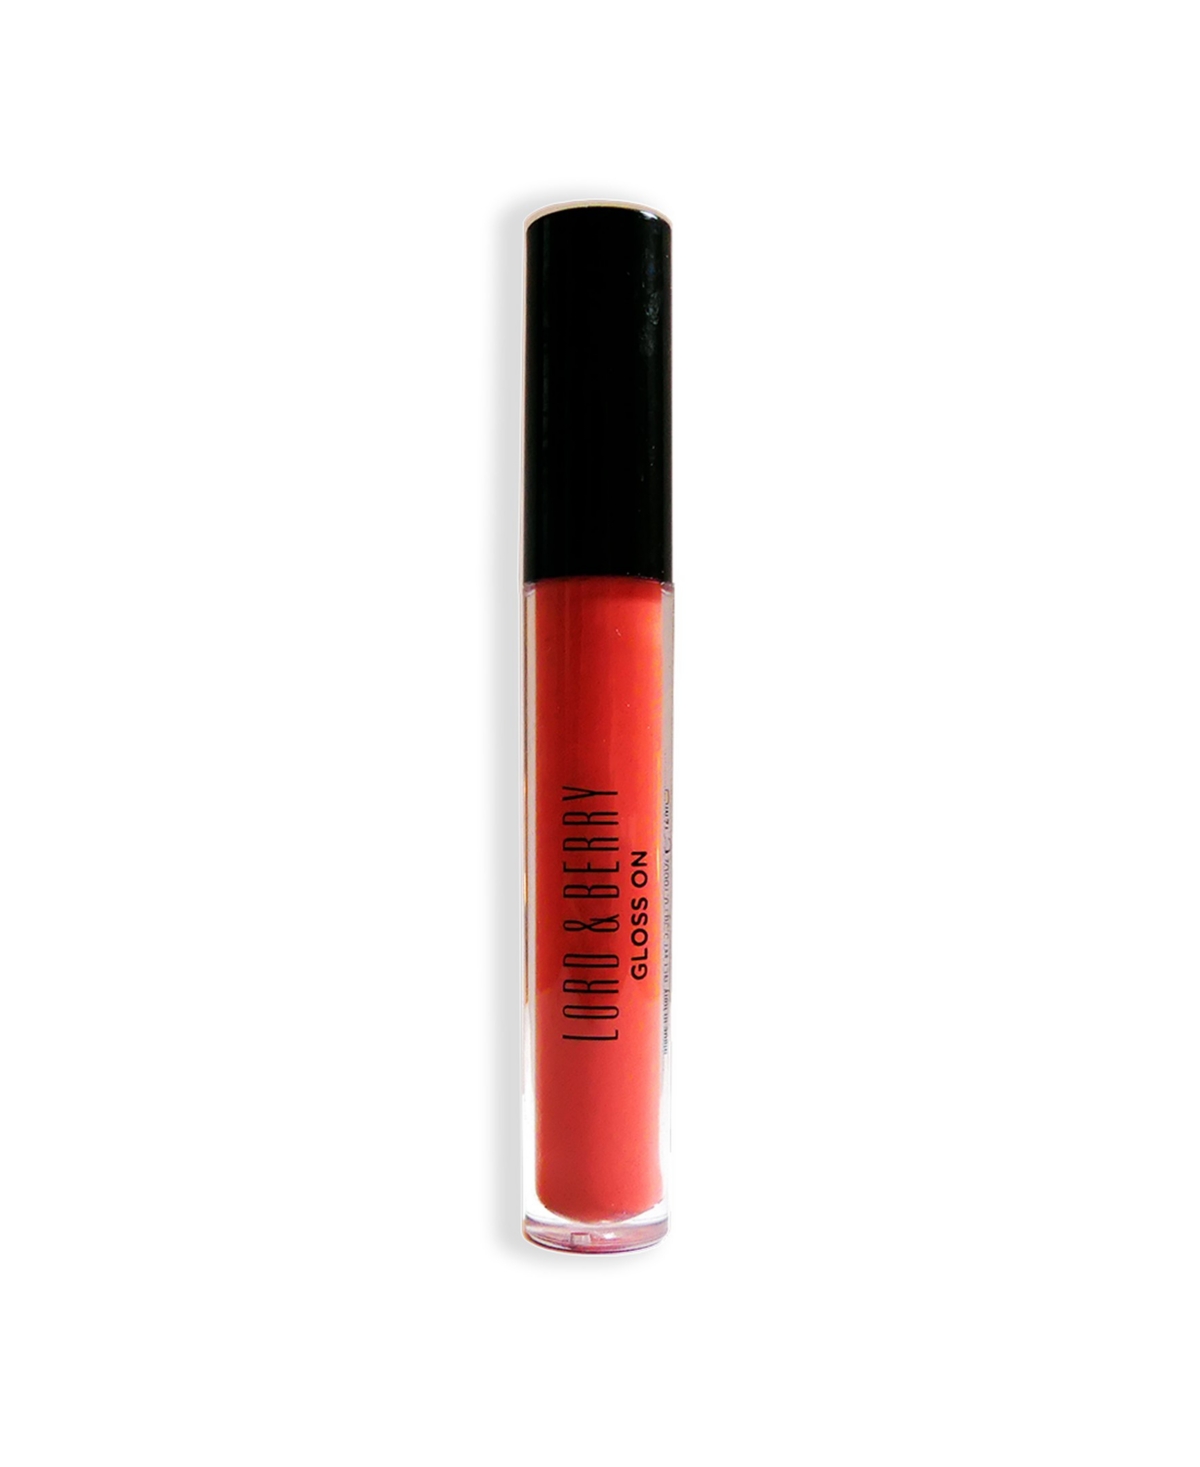 Lord & Berry Gloss On Lip Gloss, 5.5g. In Free After